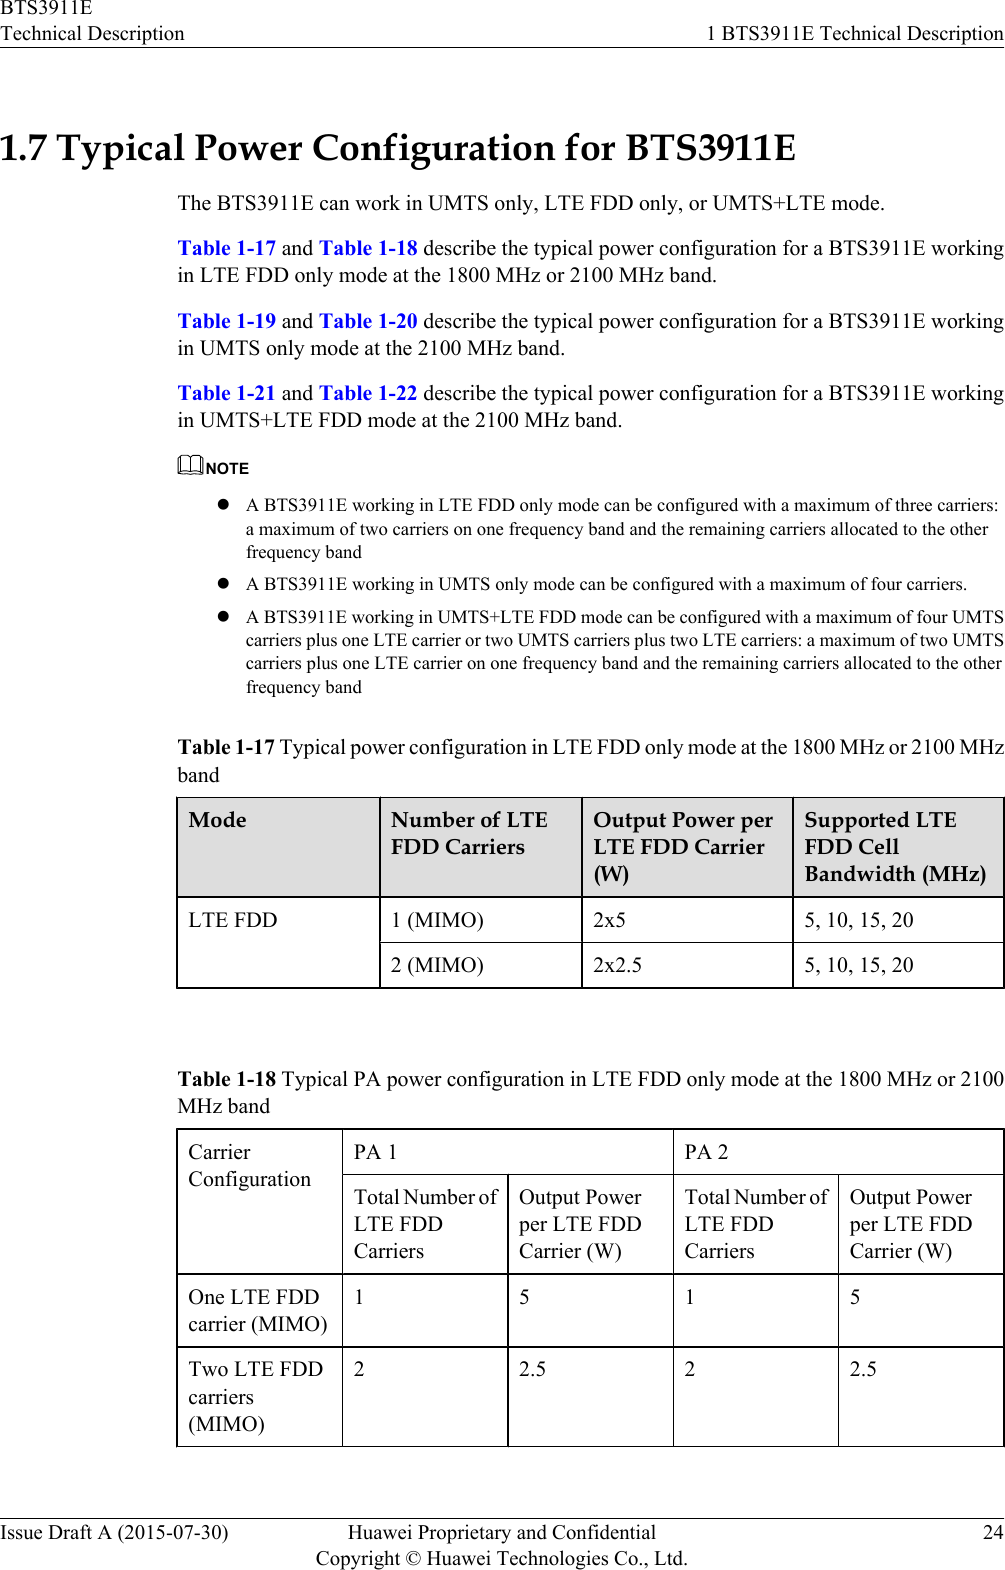 1.7 Typical Power Configuration for BTS3911EThe BTS3911E can work in UMTS only, LTE FDD only, or UMTS+LTE mode.Table 1-17 and Table 1-18 describe the typical power configuration for a BTS3911E workingin LTE FDD only mode at the 1800 MHz or 2100 MHz band.Table 1-19 and Table 1-20 describe the typical power configuration for a BTS3911E workingin UMTS only mode at the 2100 MHz band.Table 1-21 and Table 1-22 describe the typical power configuration for a BTS3911E workingin UMTS+LTE FDD mode at the 2100 MHz band.NOTElA BTS3911E working in LTE FDD only mode can be configured with a maximum of three carriers:a maximum of two carriers on one frequency band and the remaining carriers allocated to the otherfrequency bandlA BTS3911E working in UMTS only mode can be configured with a maximum of four carriers.lA BTS3911E working in UMTS+LTE FDD mode can be configured with a maximum of four UMTScarriers plus one LTE carrier or two UMTS carriers plus two LTE carriers: a maximum of two UMTScarriers plus one LTE carrier on one frequency band and the remaining carriers allocated to the otherfrequency bandTable 1-17 Typical power configuration in LTE FDD only mode at the 1800 MHz or 2100 MHzbandMode Number of LTEFDD CarriersOutput Power perLTE FDD Carrier(W)Supported LTEFDD CellBandwidth (MHz)LTE FDD 1 (MIMO) 2x5 5, 10, 15, 202 (MIMO) 2x2.5 5, 10, 15, 20 Table 1-18 Typical PA power configuration in LTE FDD only mode at the 1800 MHz or 2100MHz bandCarrierConfigurationPA 1 PA 2Total Number ofLTE FDDCarriersOutput Powerper LTE FDDCarrier (W)Total Number ofLTE FDDCarriersOutput Powerper LTE FDDCarrier (W)One LTE FDDcarrier (MIMO)1 5 1 5Two LTE FDDcarriers(MIMO)2 2.5 2 2.5 BTS3911ETechnical Description 1 BTS3911E Technical DescriptionIssue Draft A (2015-07-30) Huawei Proprietary and ConfidentialCopyright © Huawei Technologies Co., Ltd.24